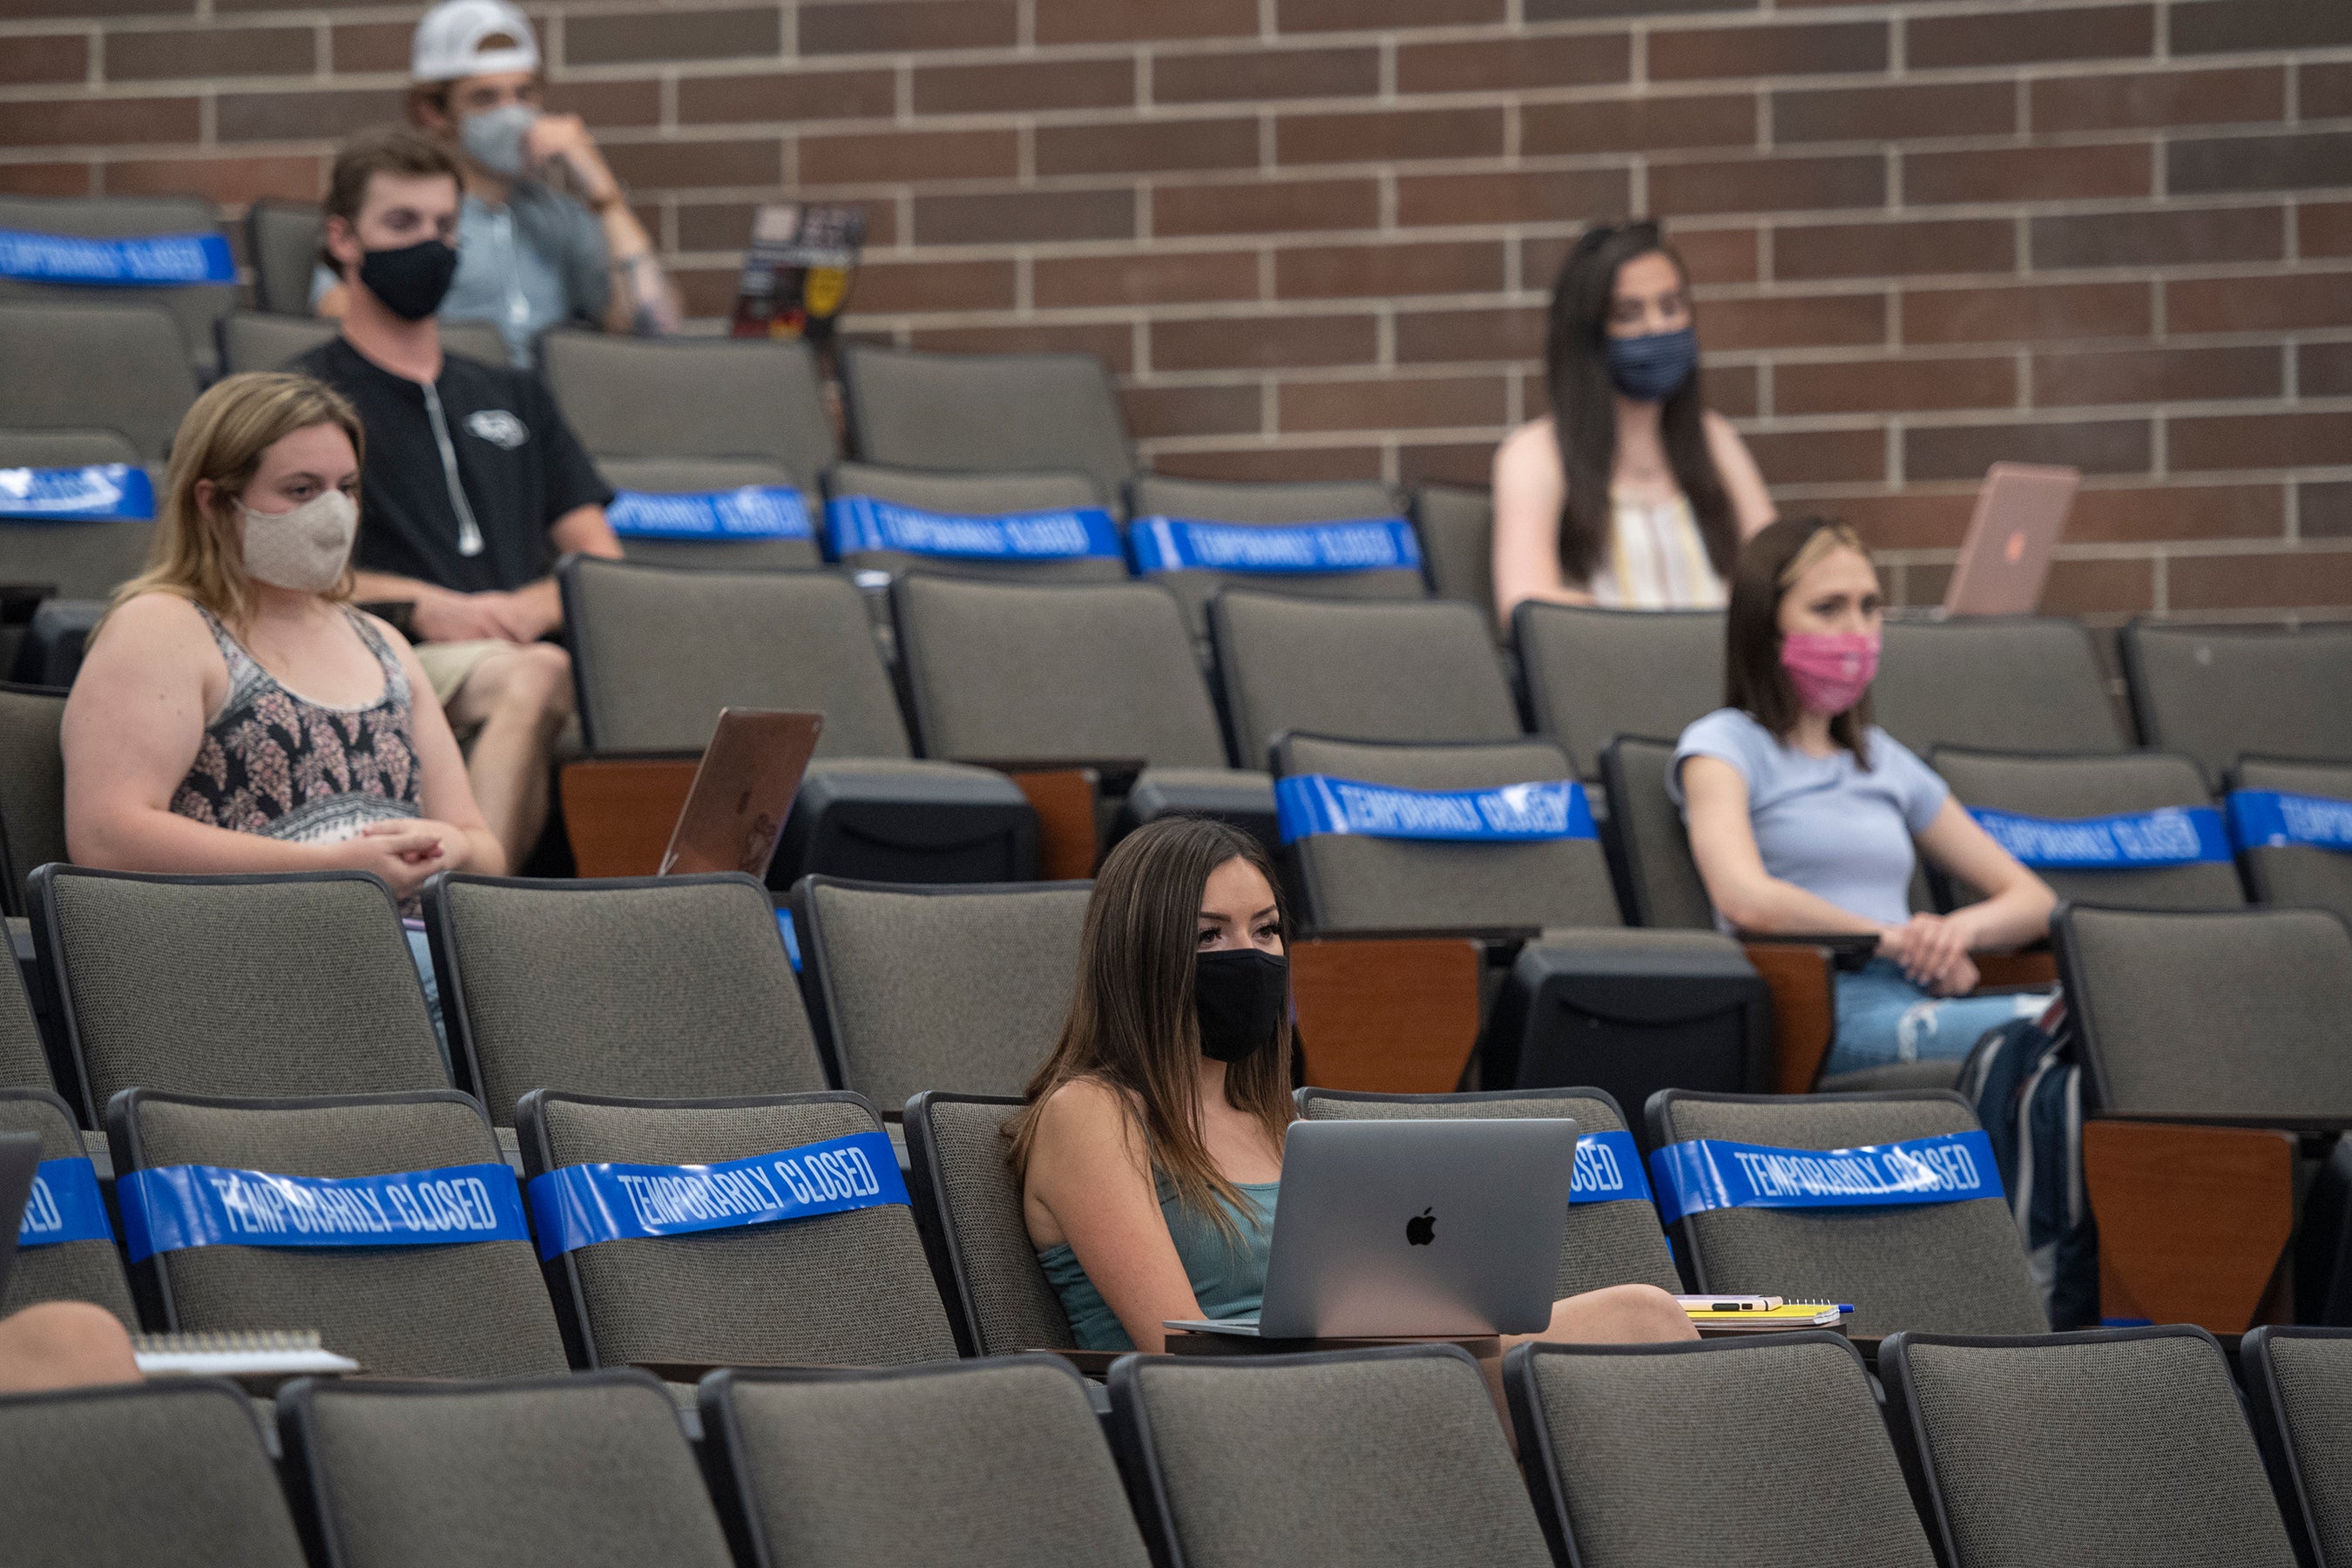 Students sitting in a lecture with masks on while socially distancing